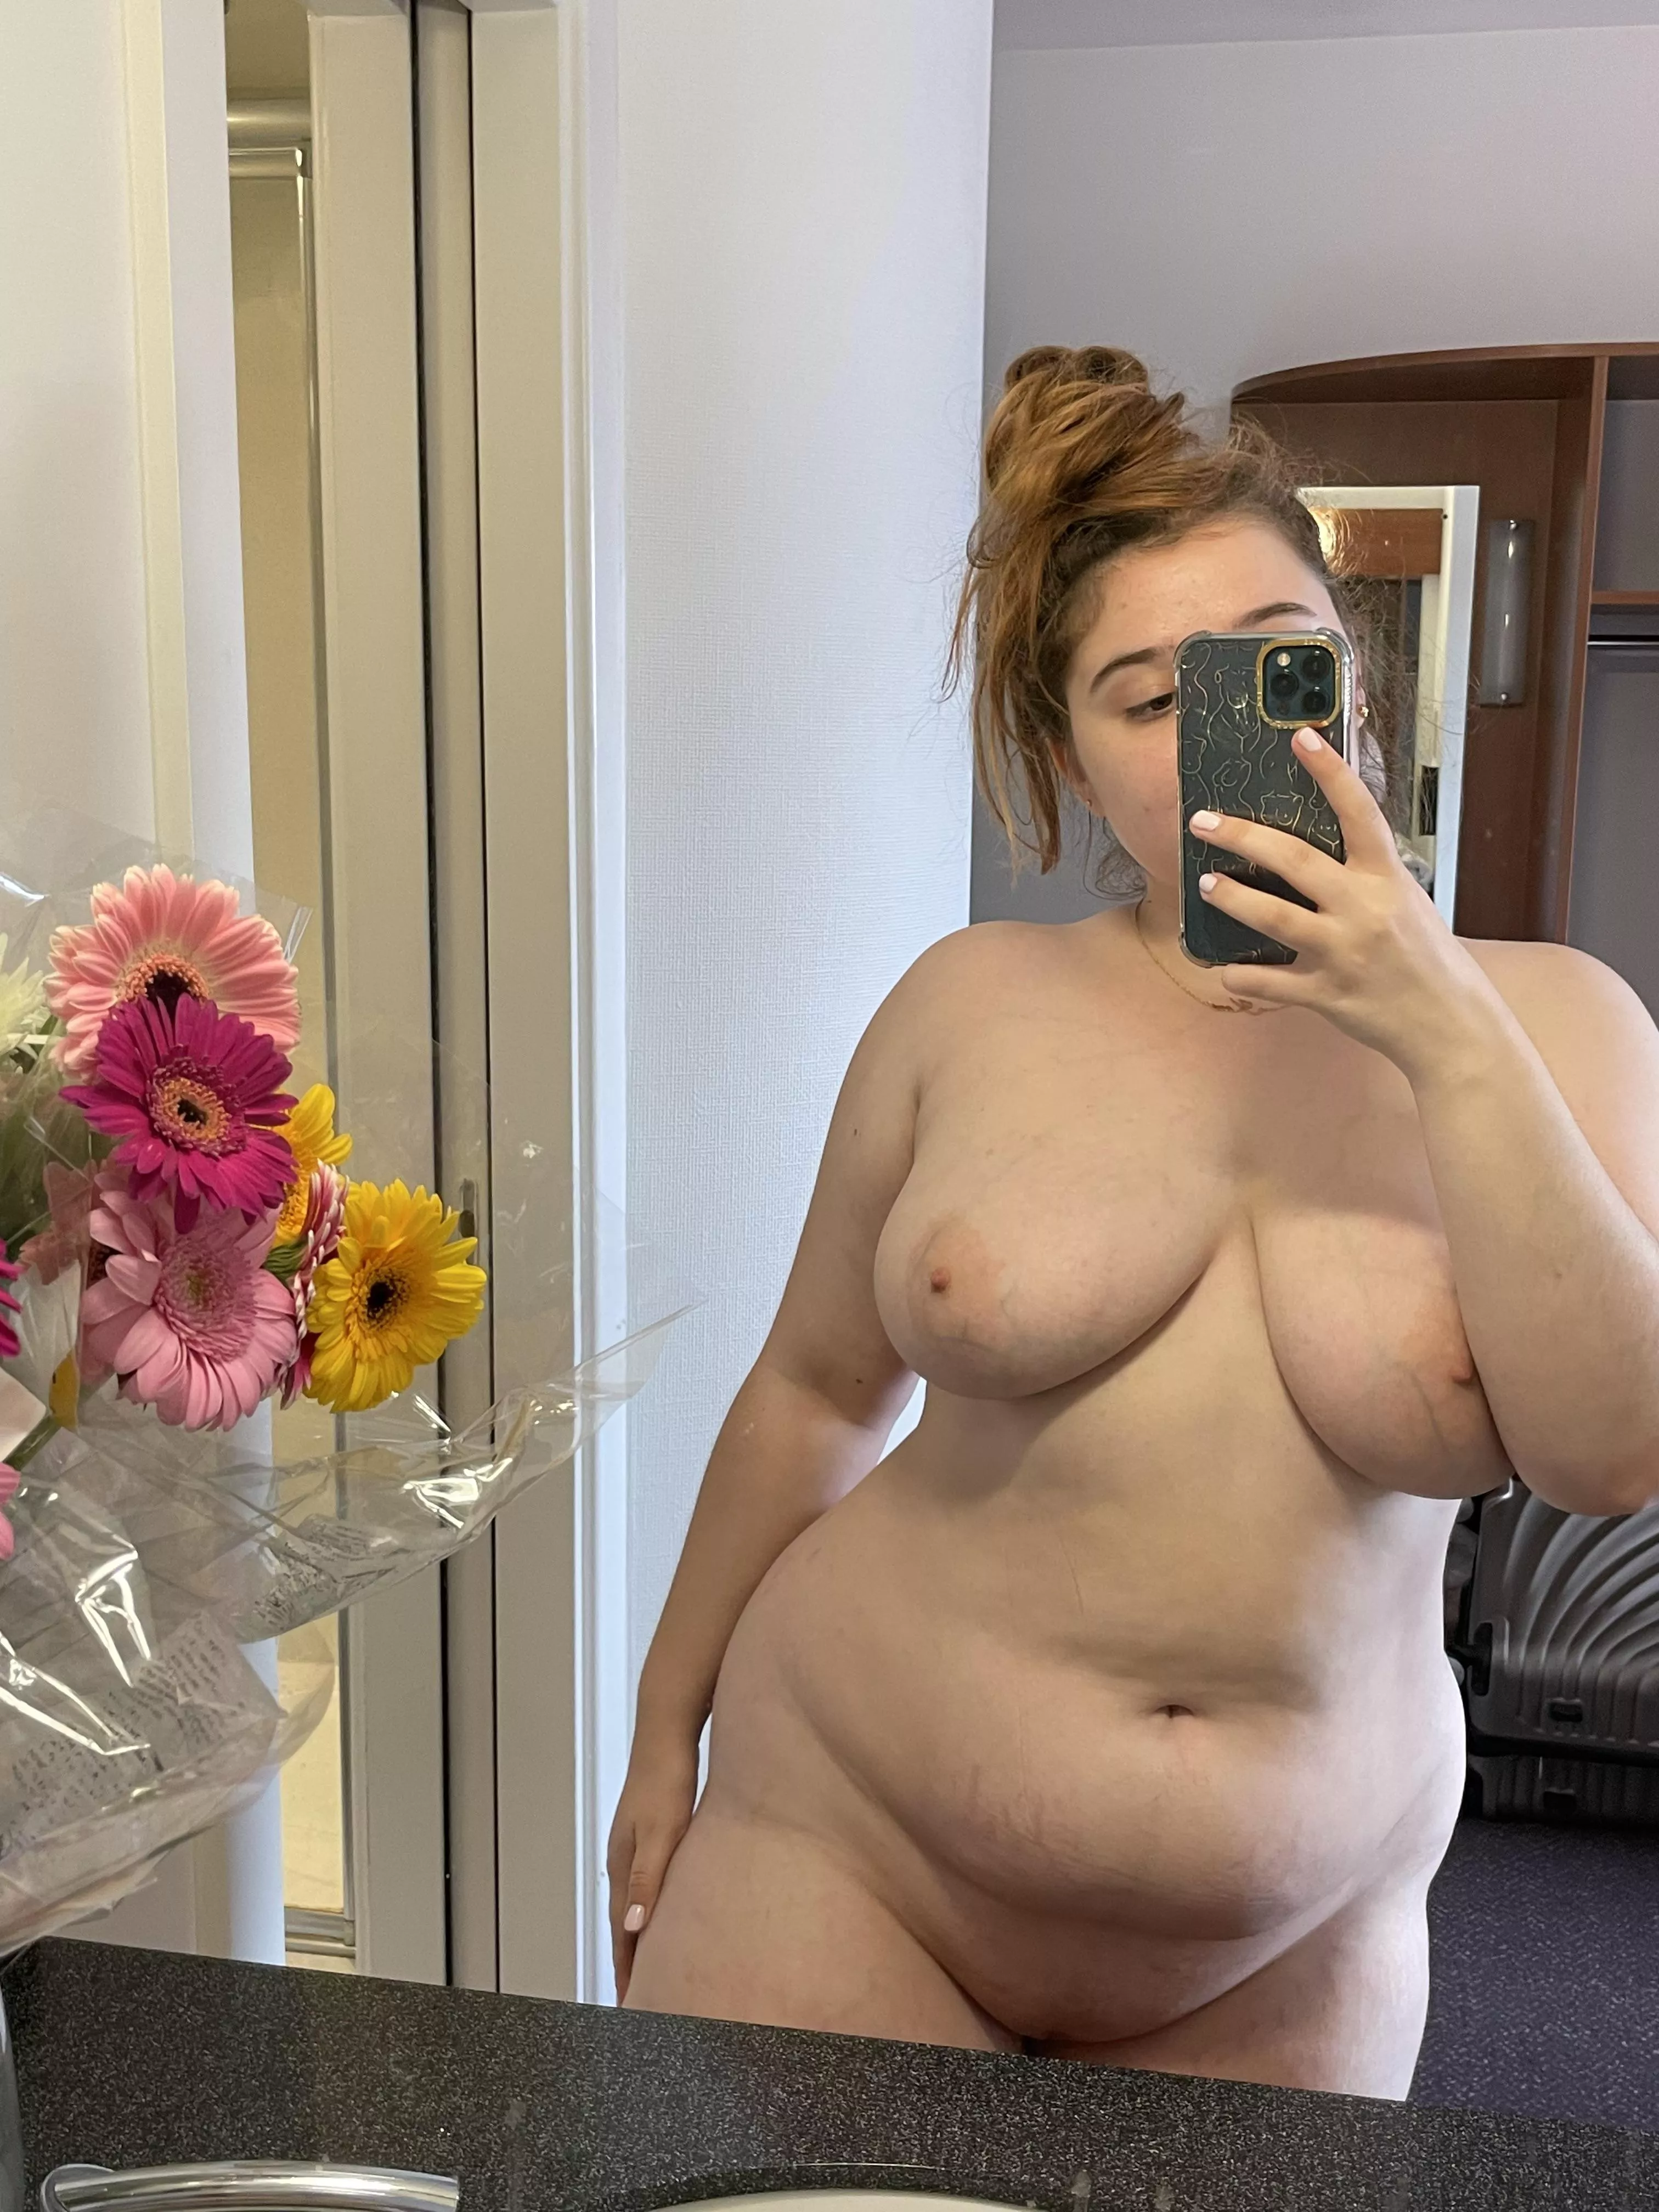 fat girlfriend mirror nudes Sex Images Hq